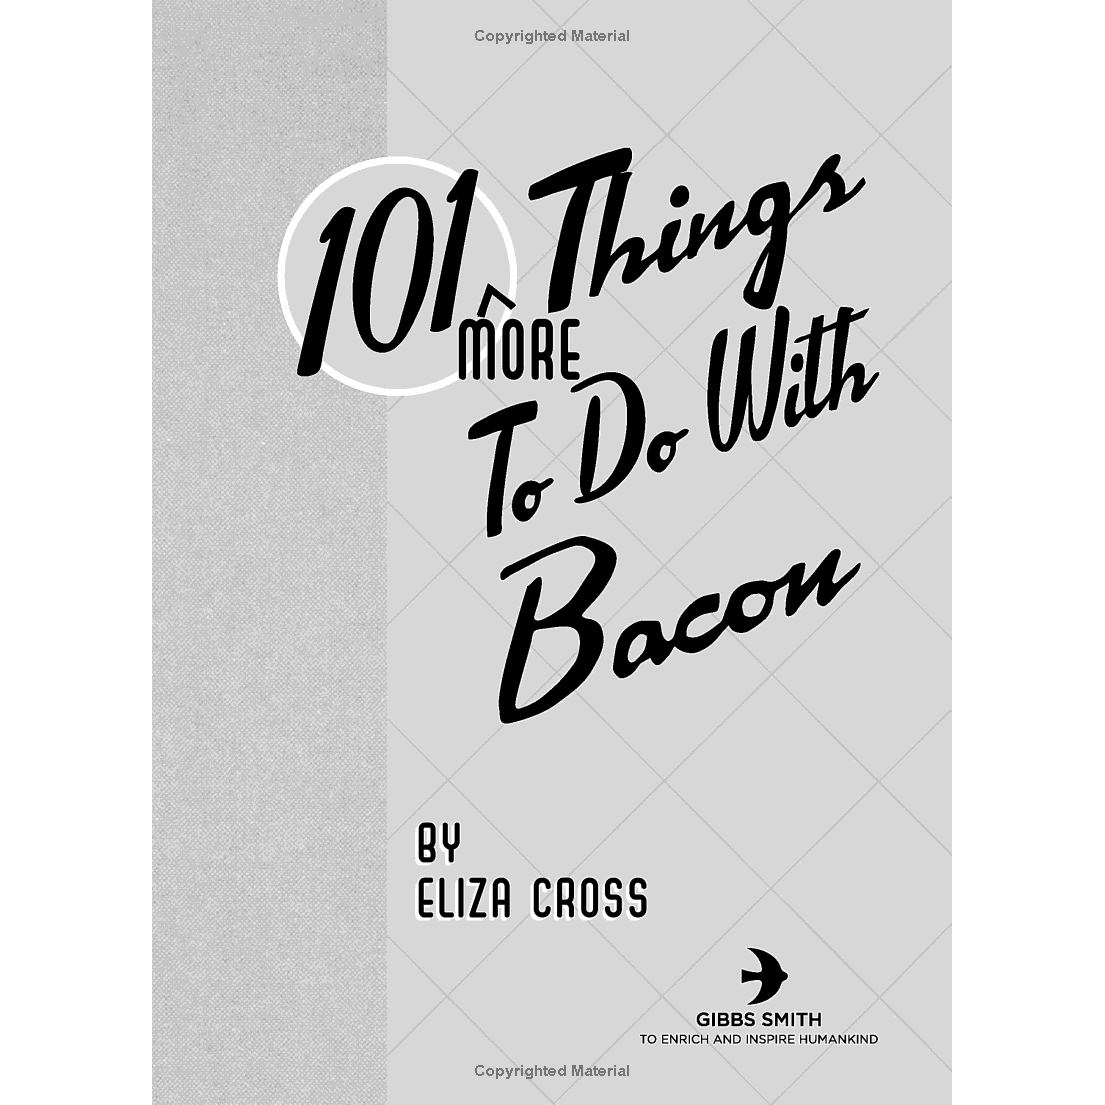 101 More Things To Do With Bacon by Eliza Cross